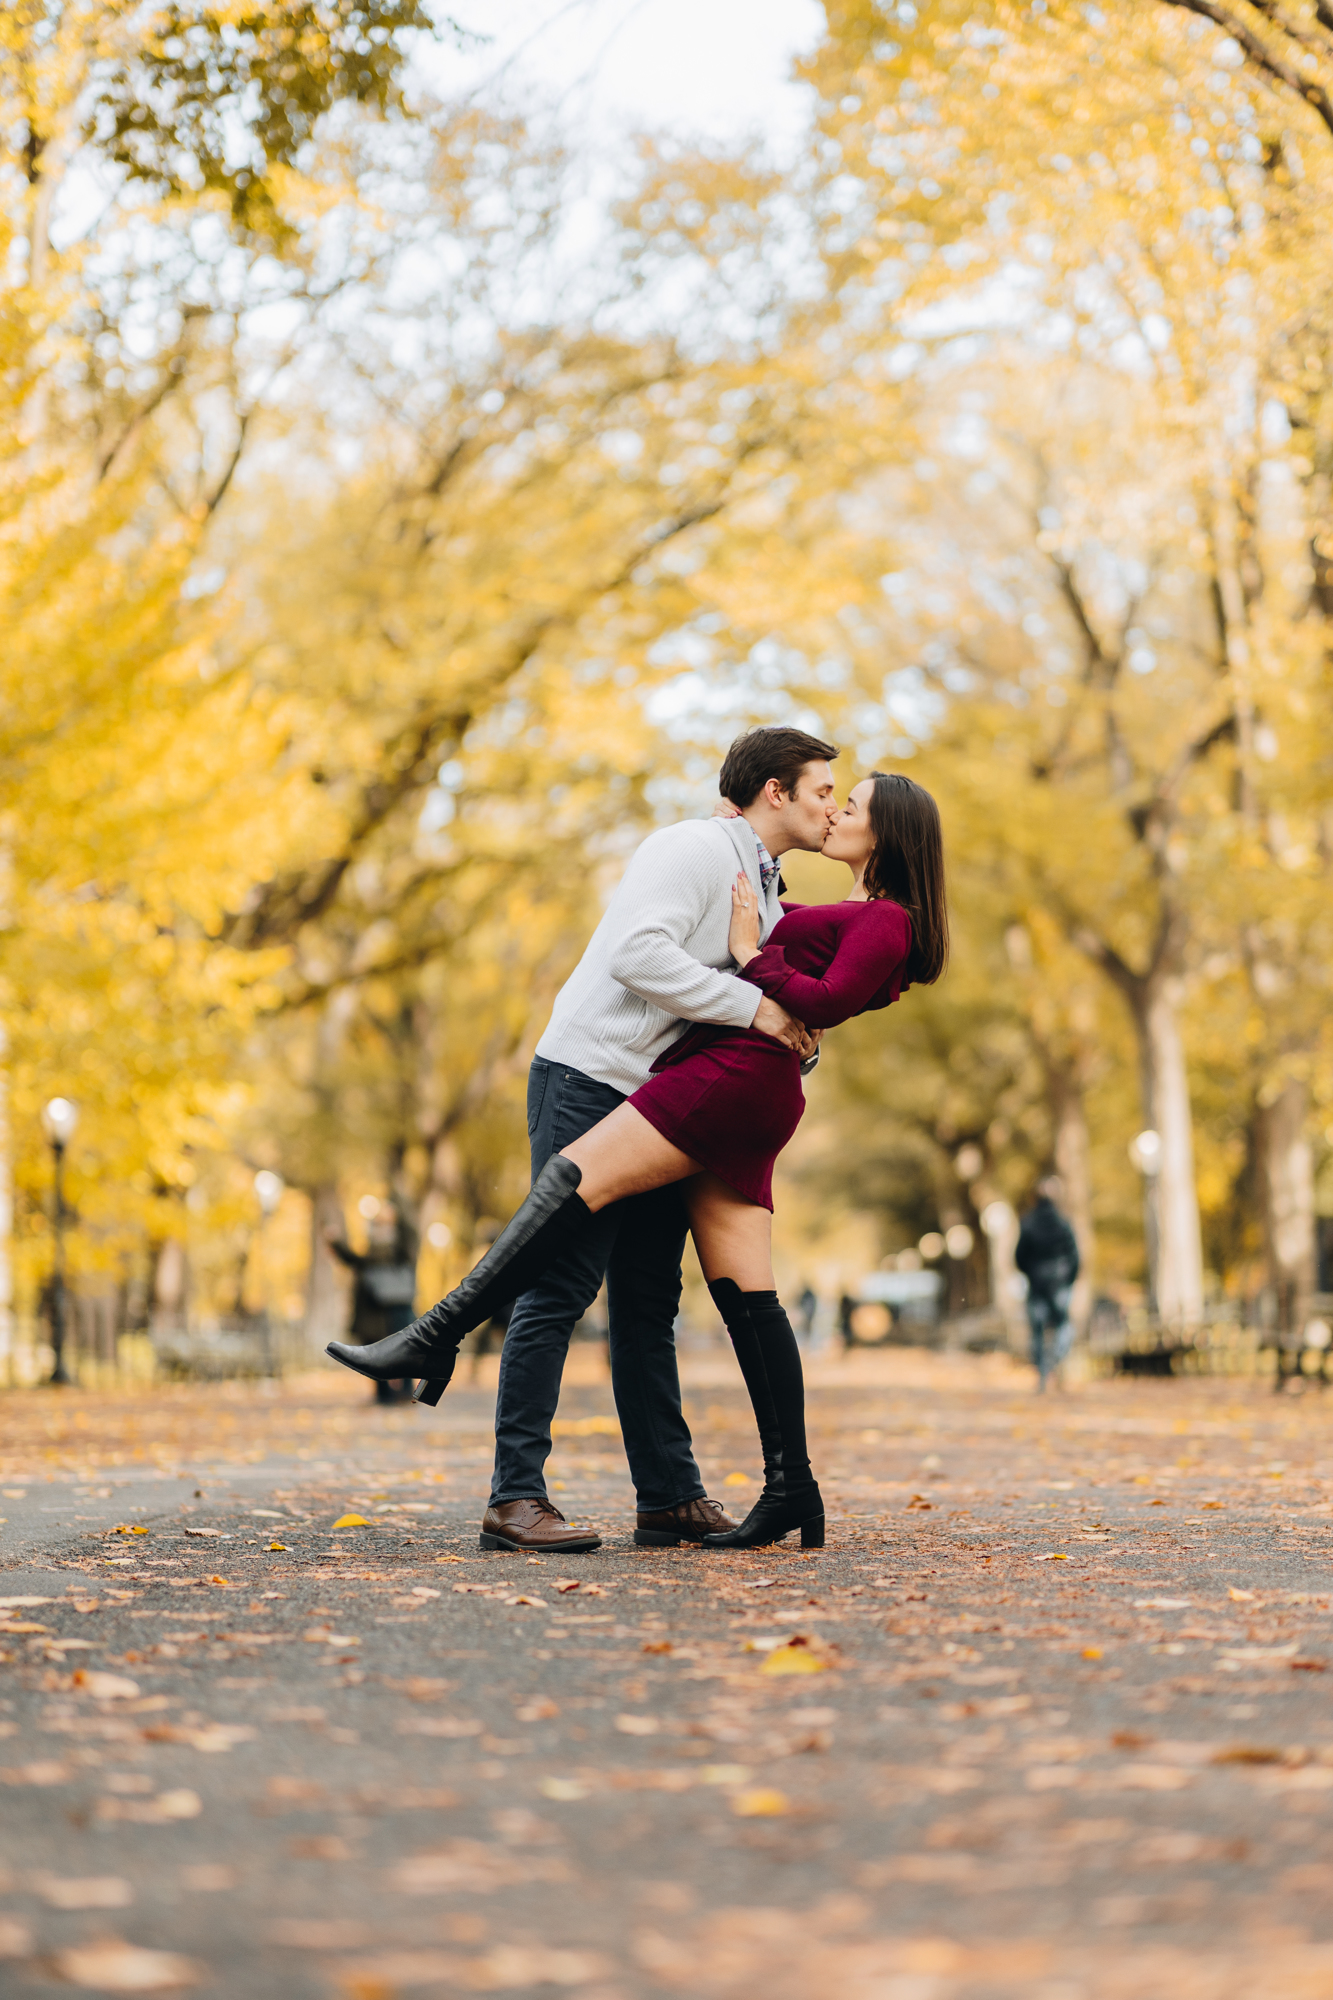 Iconic Engagement Photo Locations in Central Park